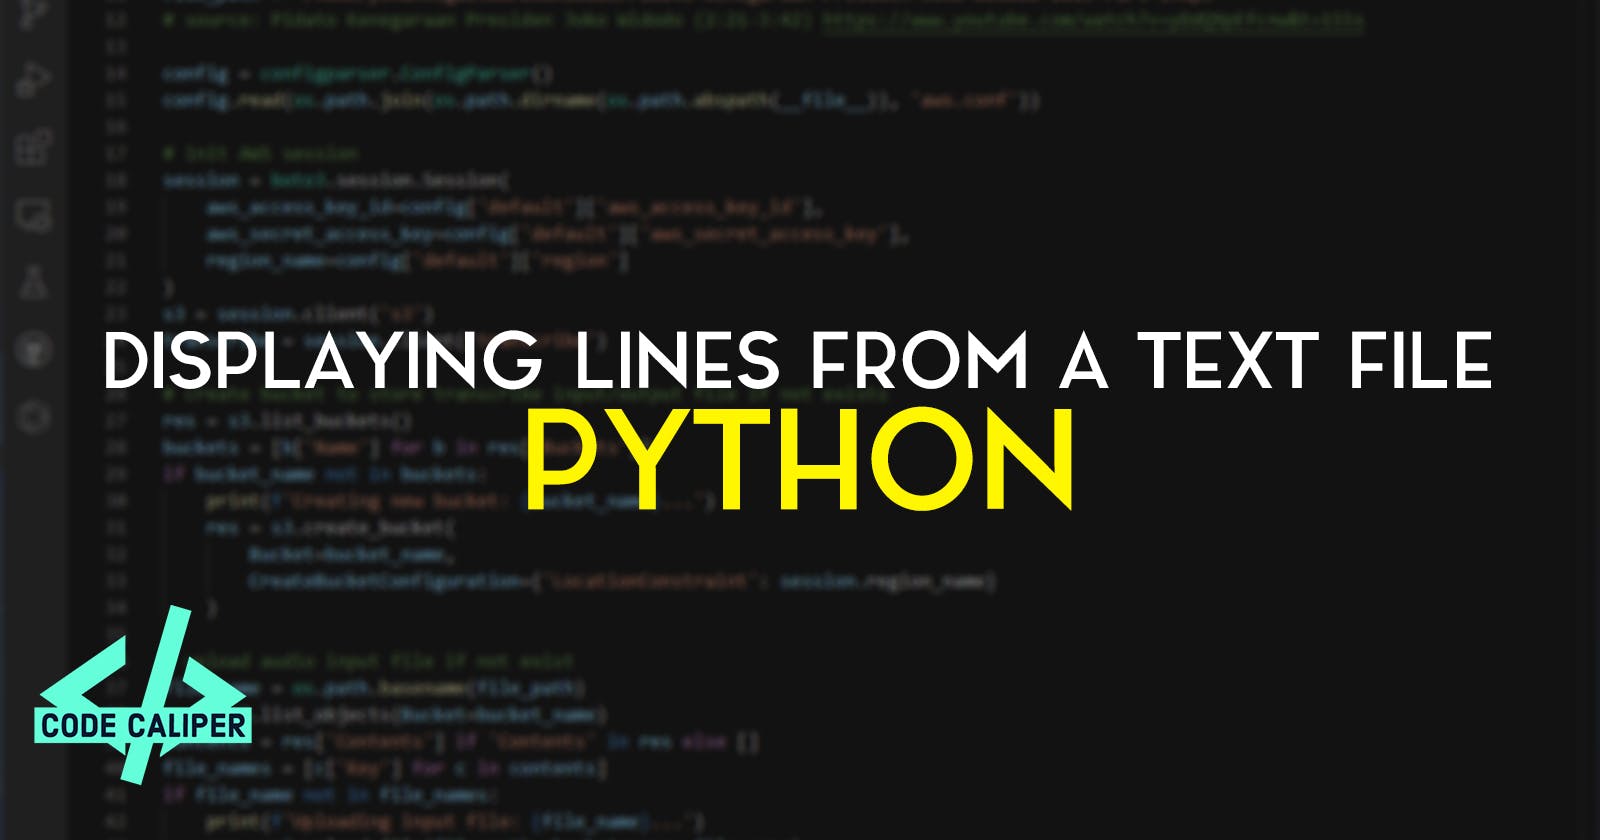 Displaying Lines from a Text File in Python